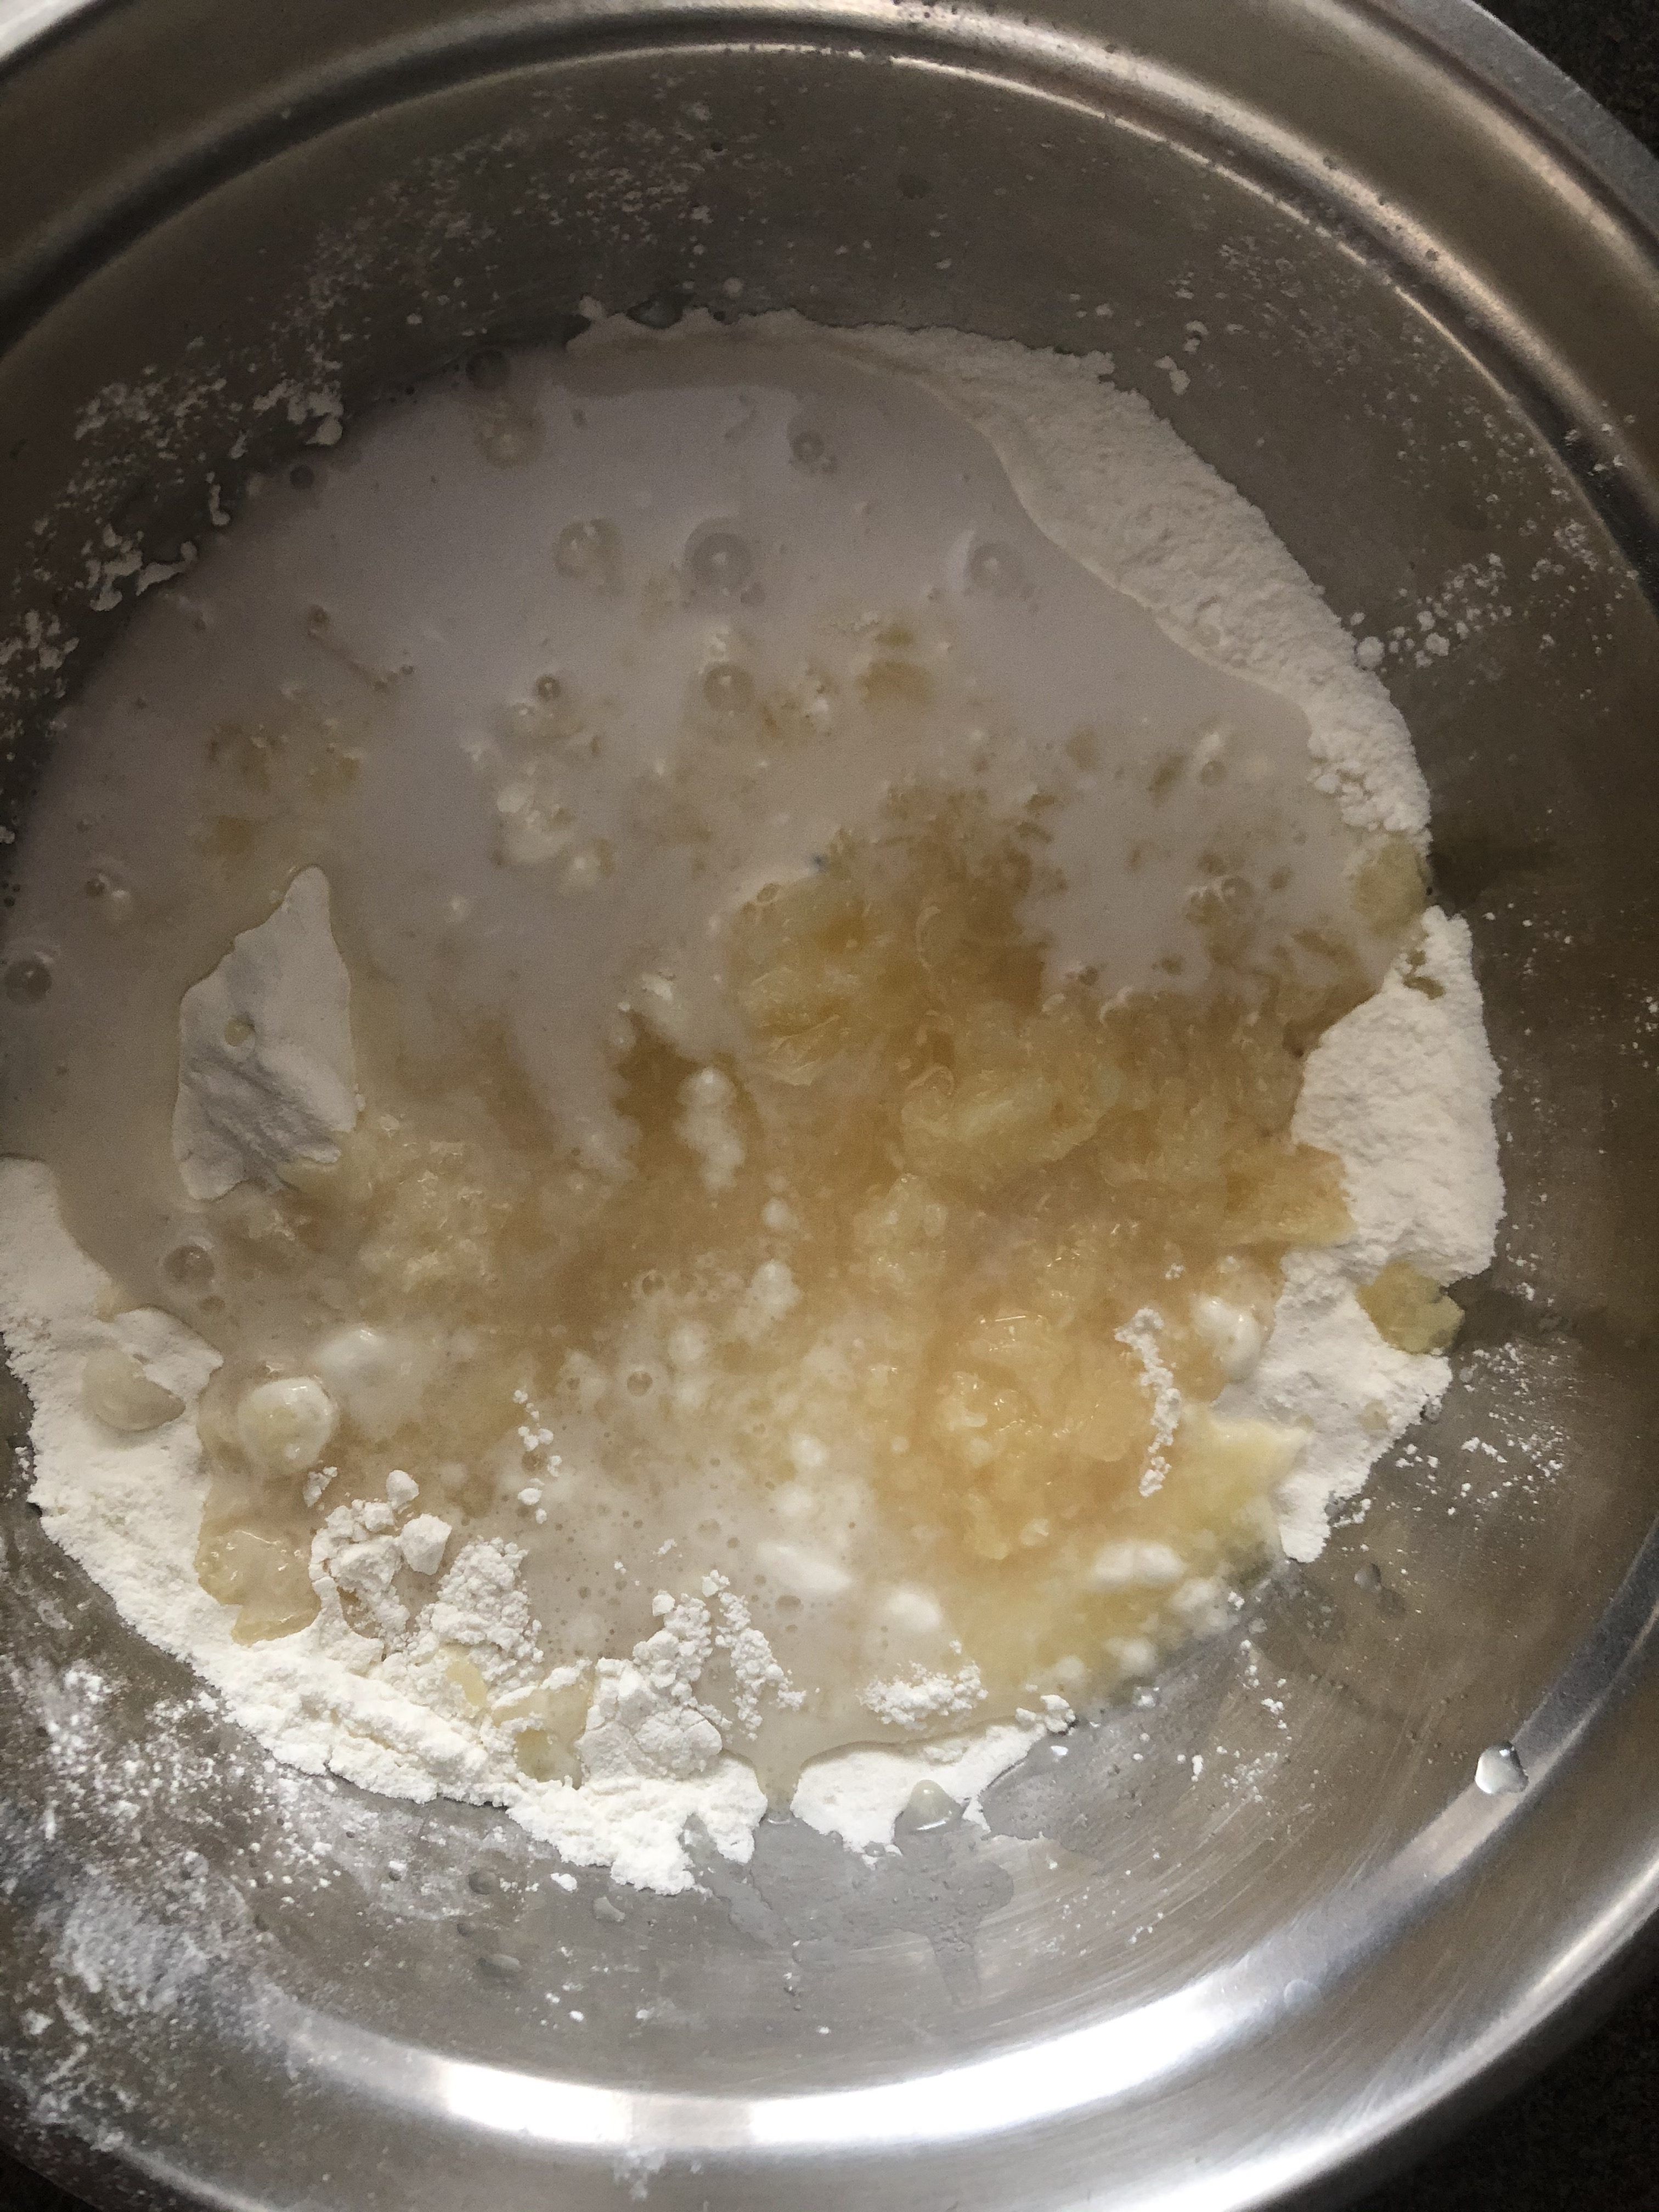 pineapple, angel food cake mix, coconut milk and extract mixed together